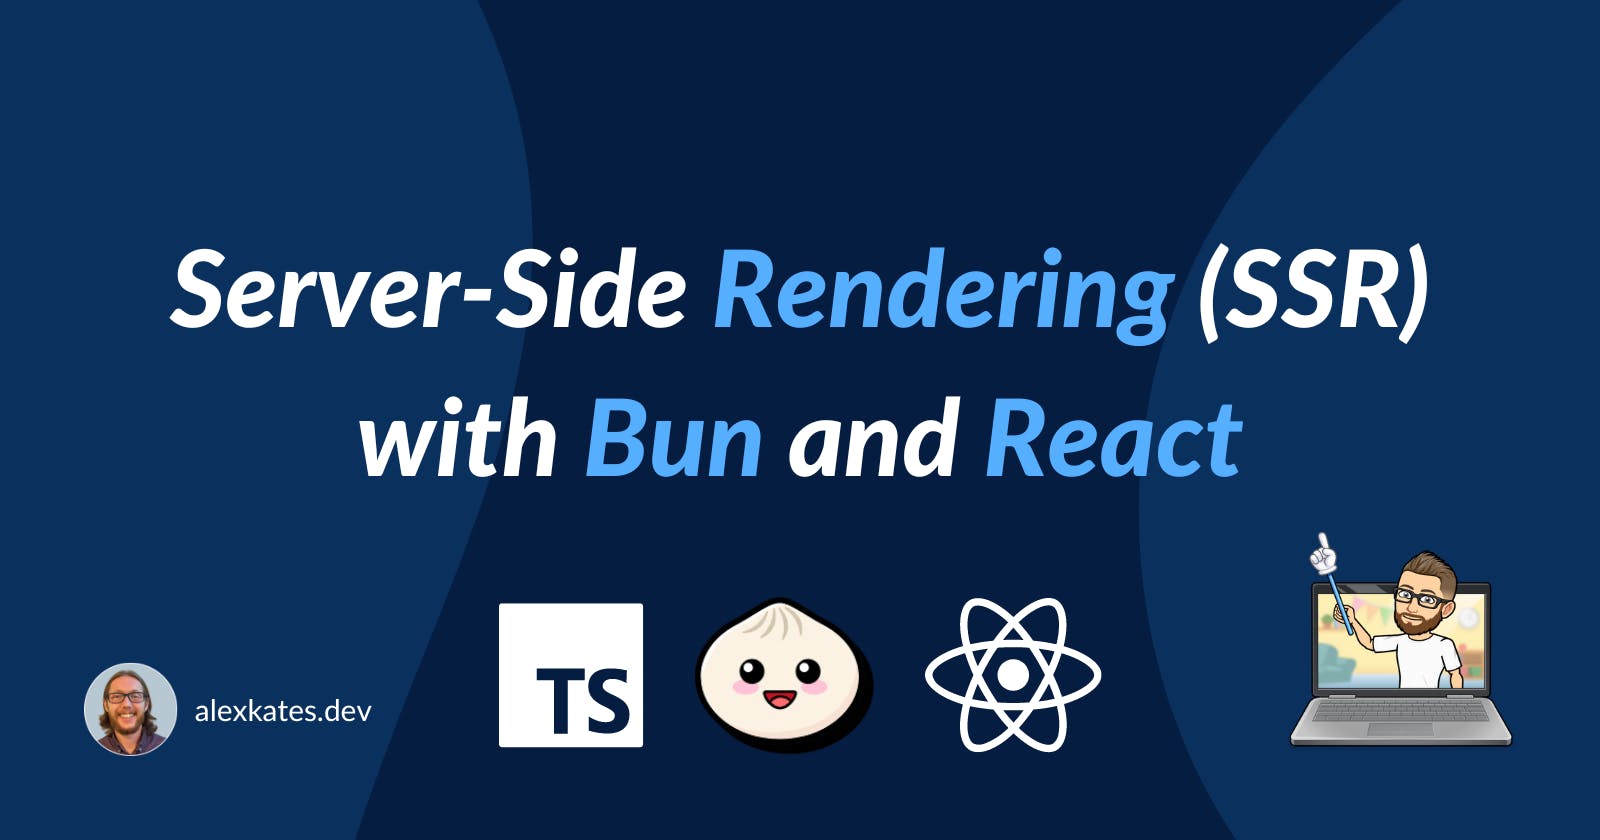 Server-Side Rendering (SSR) with Bun and React